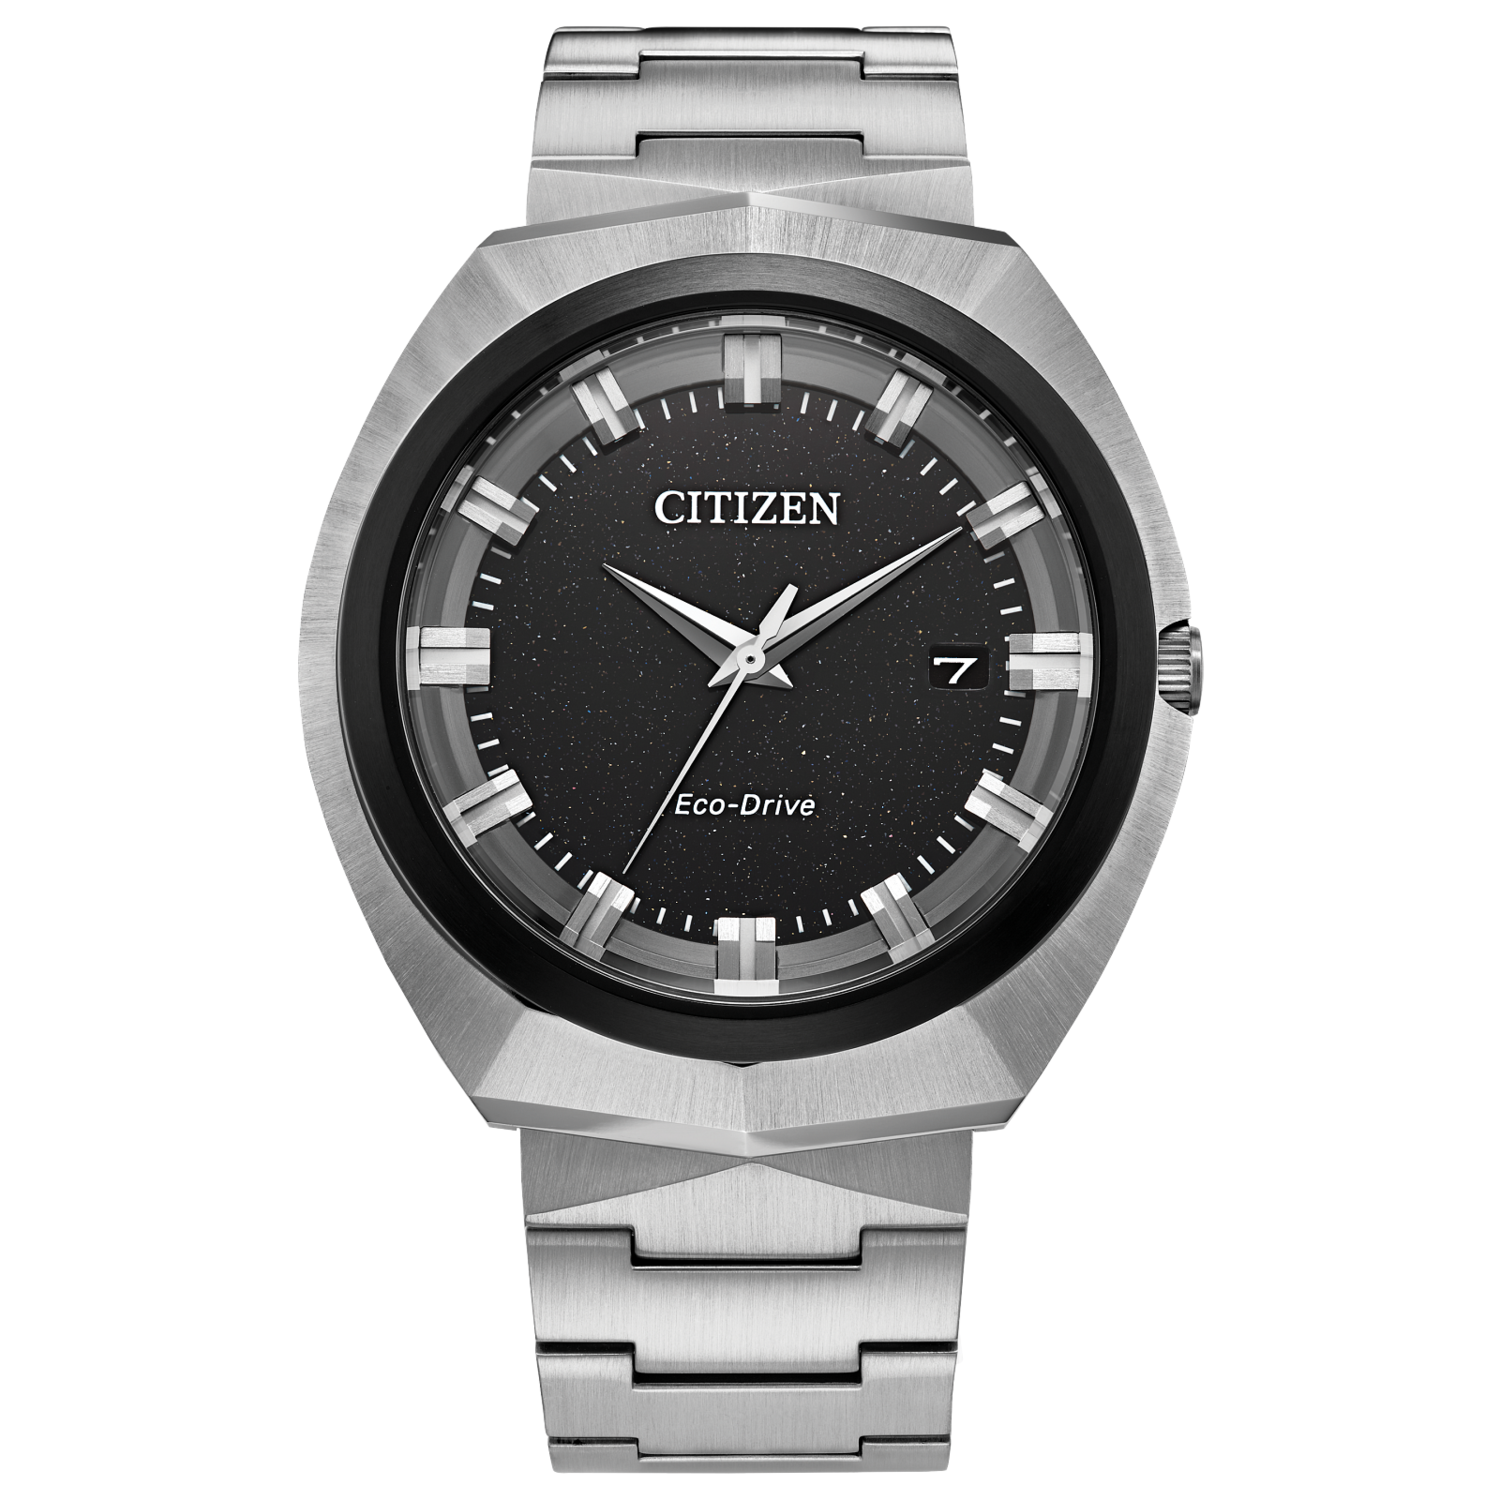 men's watch Citizen Eco-Drive 365 BN1014-55E 42.5mm 100m WR sapphire crystal sapphire crystal stainless steel strap